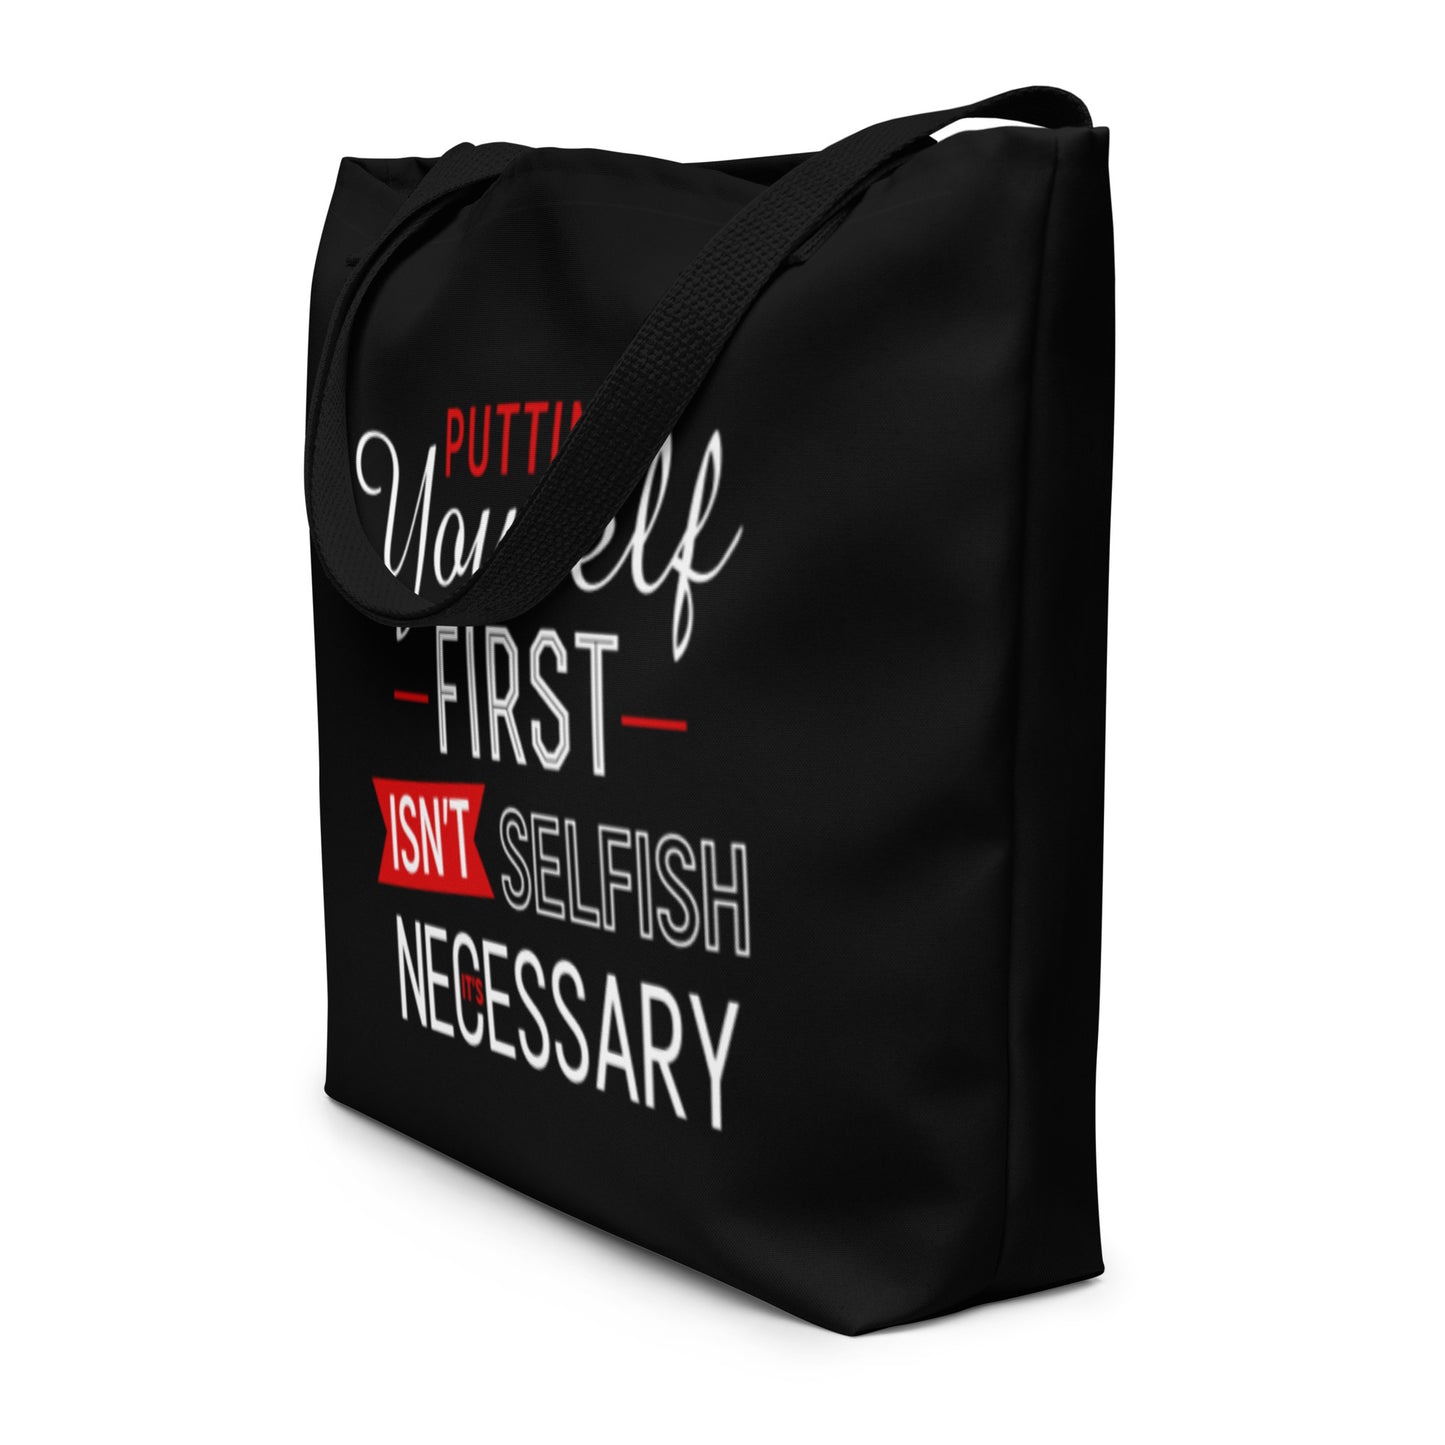 All-Over Print Large Tote Bag | Putting Yourself First